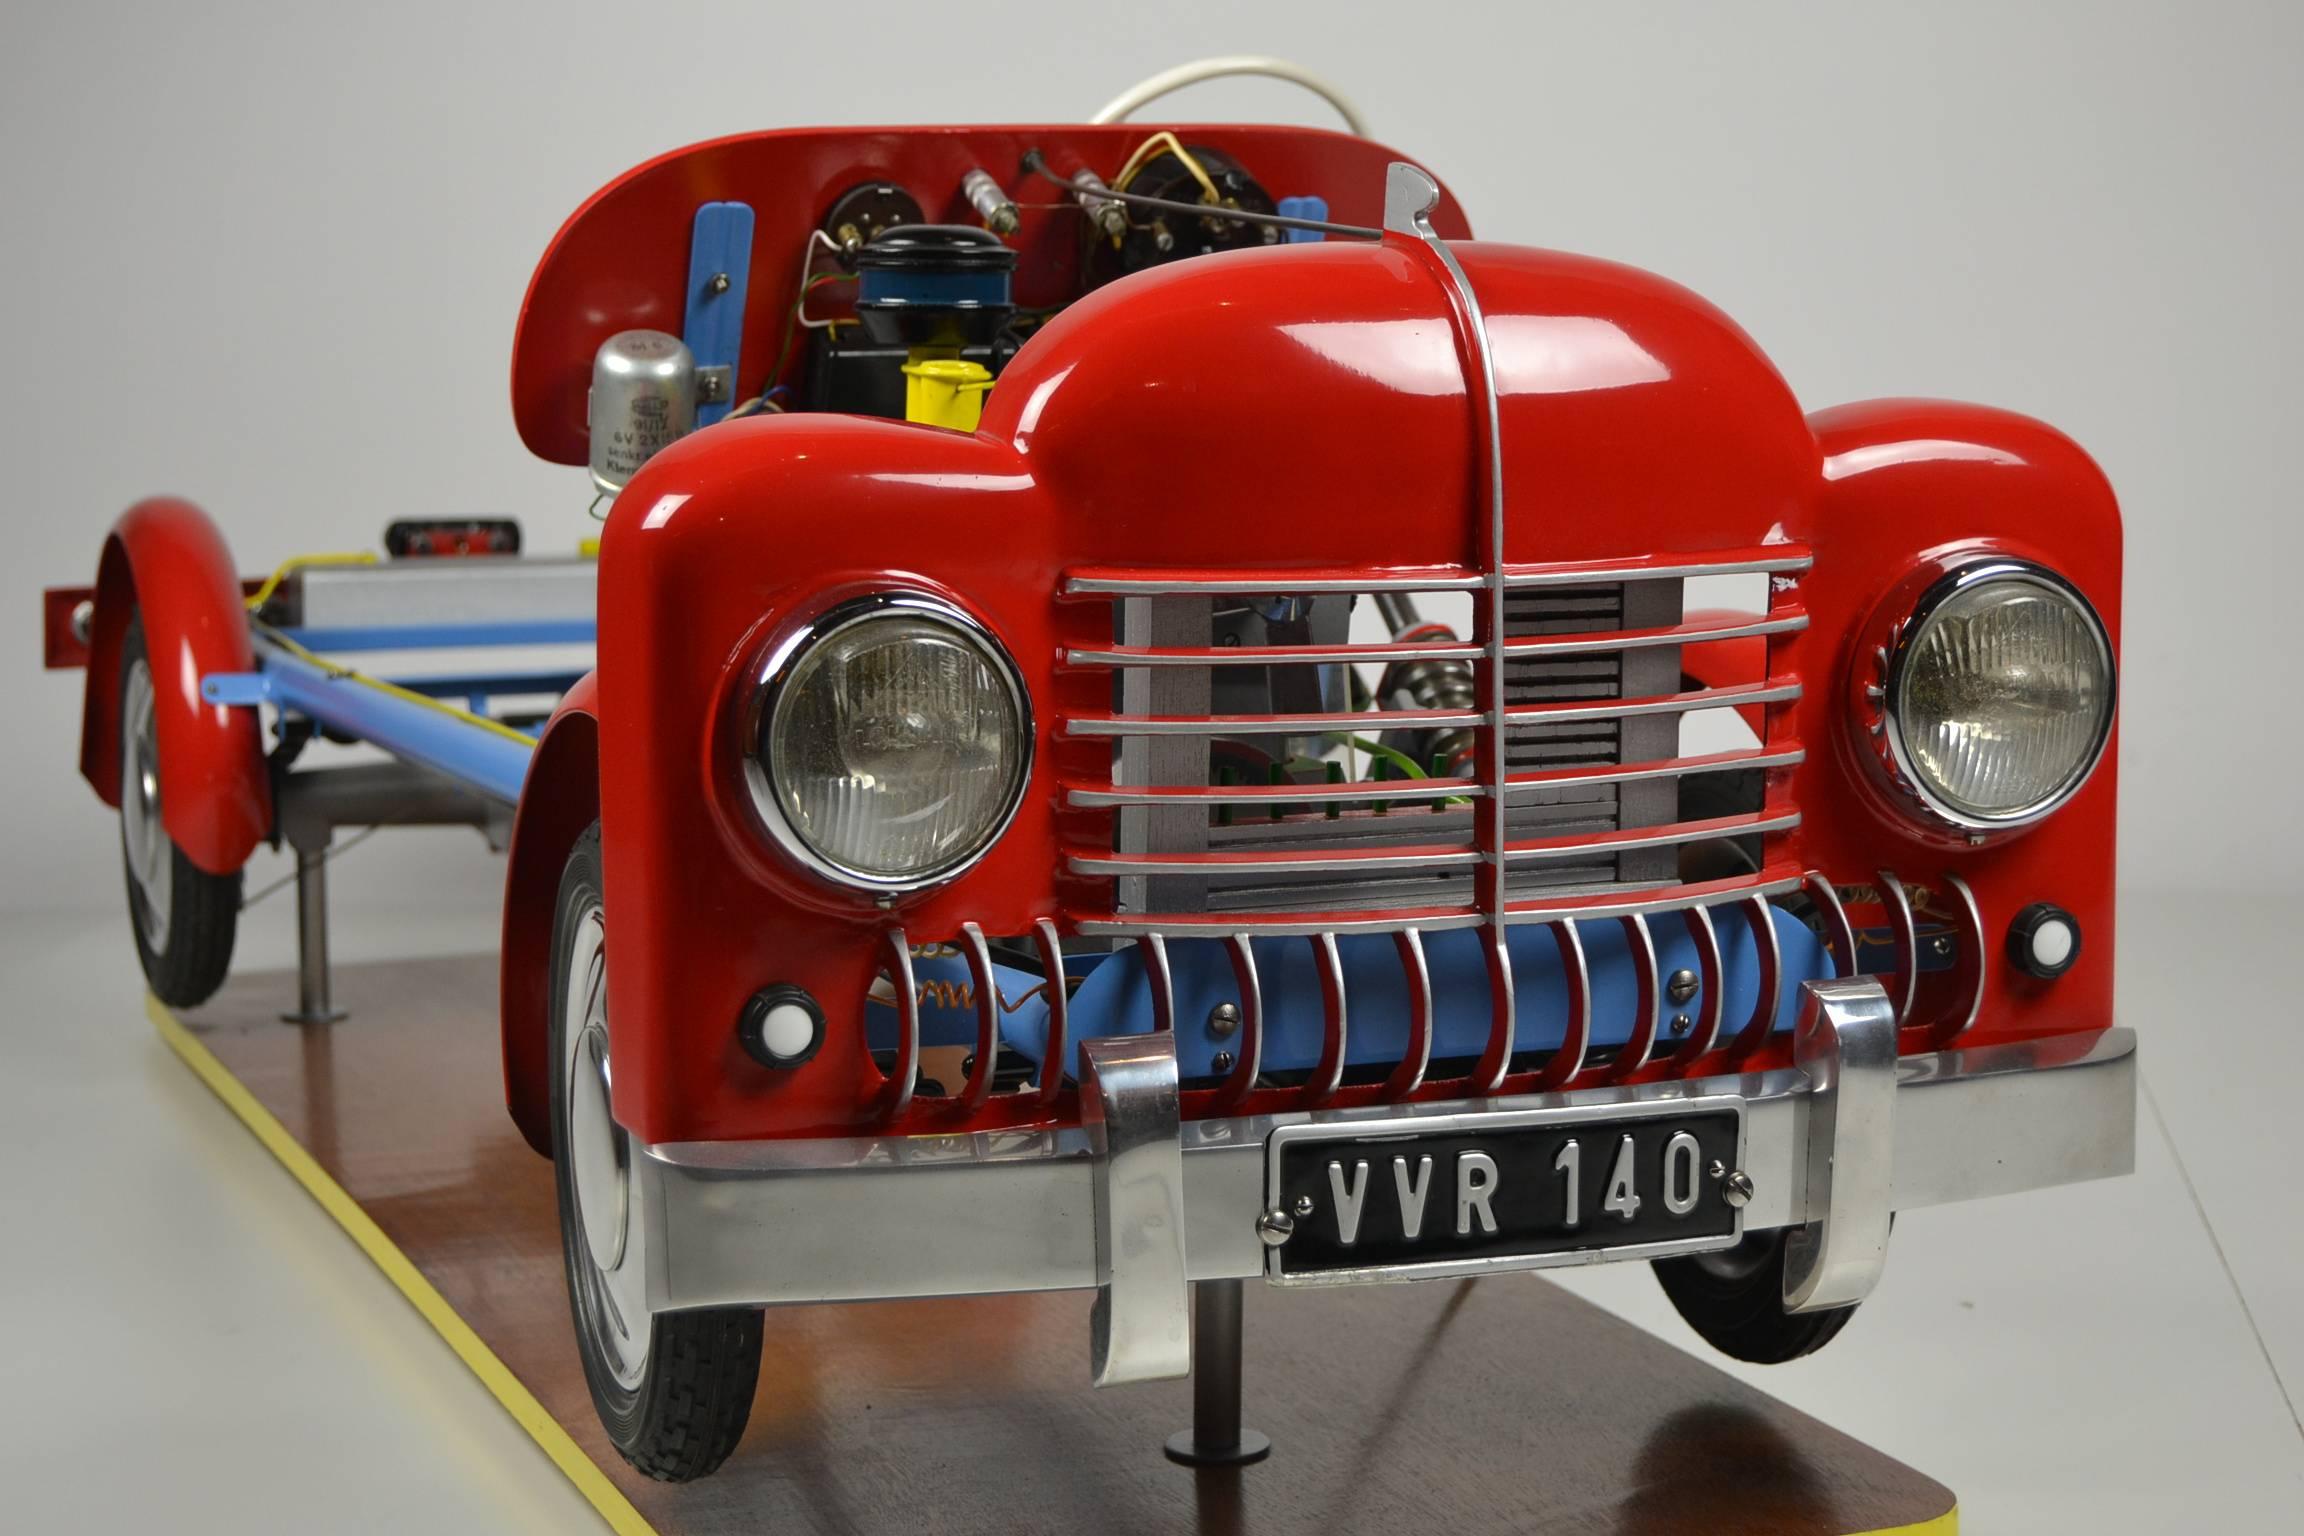 Large-scale instruction - Educational truck model type VVR 140.
This driving instruction model - Driving school model
was made by Verkers Verlag Remagen , Germany in the 1950s.

It's a technical maquette - Demonstration model- Training model